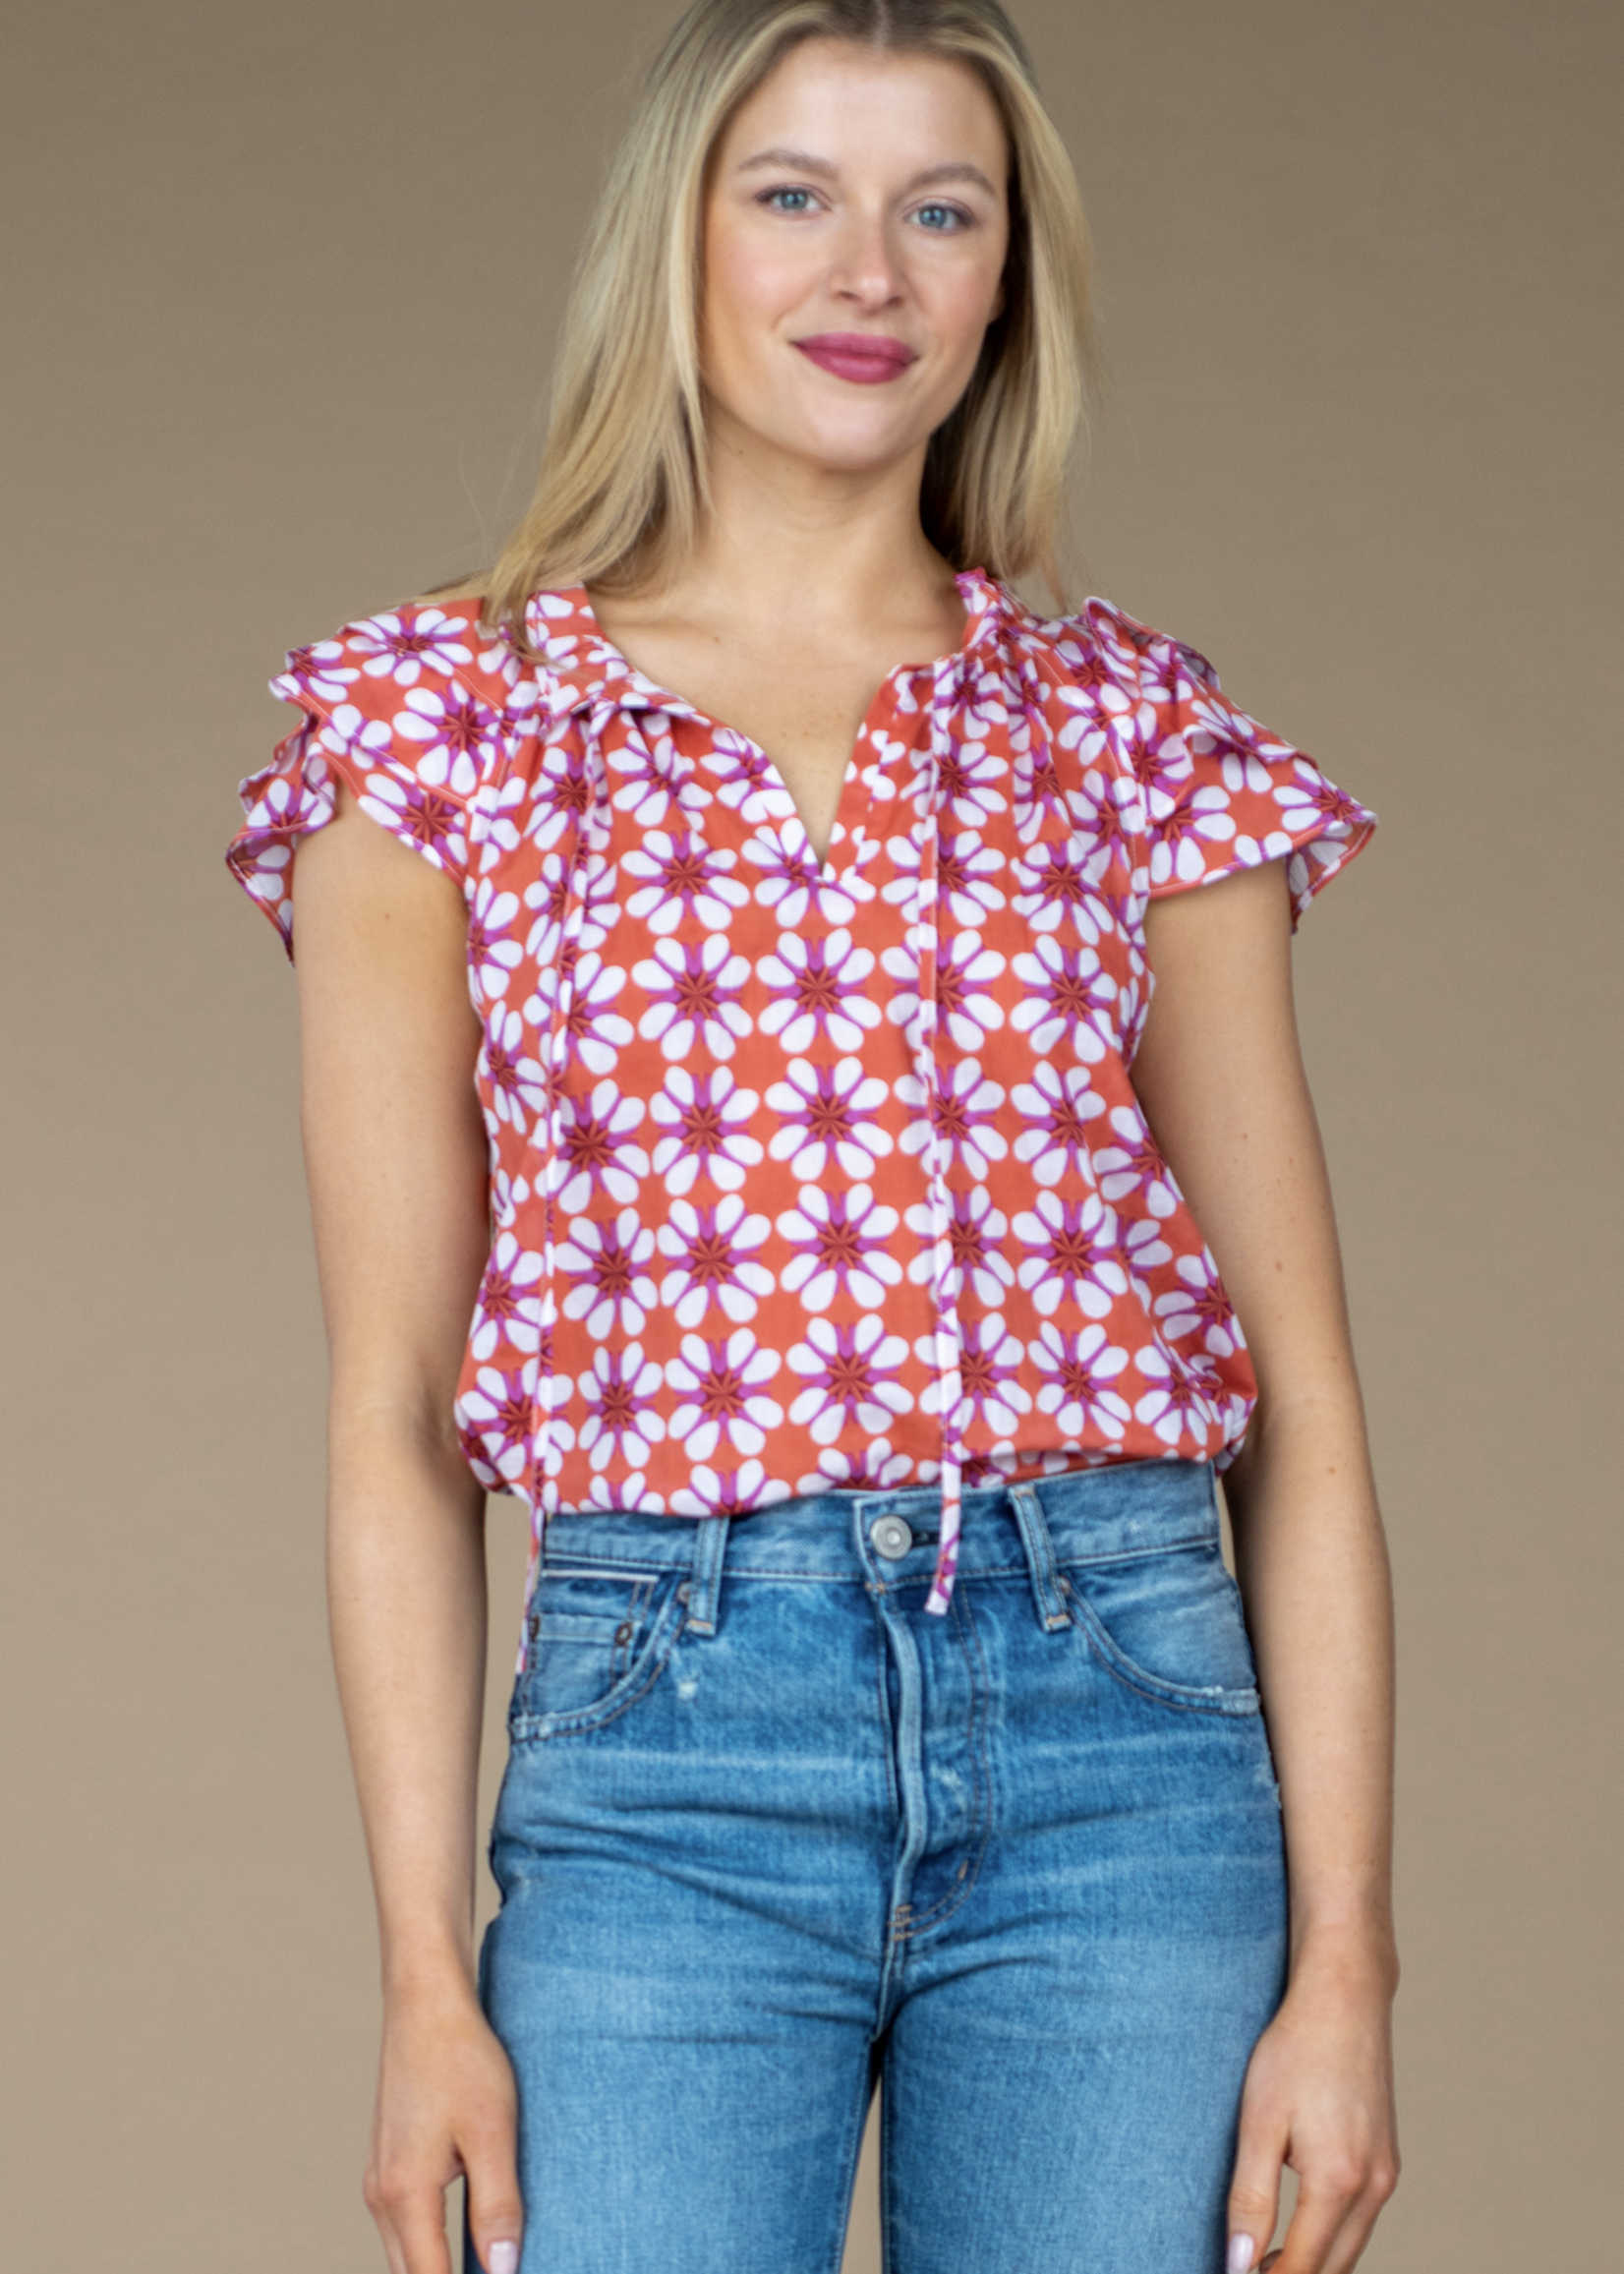 OLIVIA JAMES THE LABEL ASTRID TOP